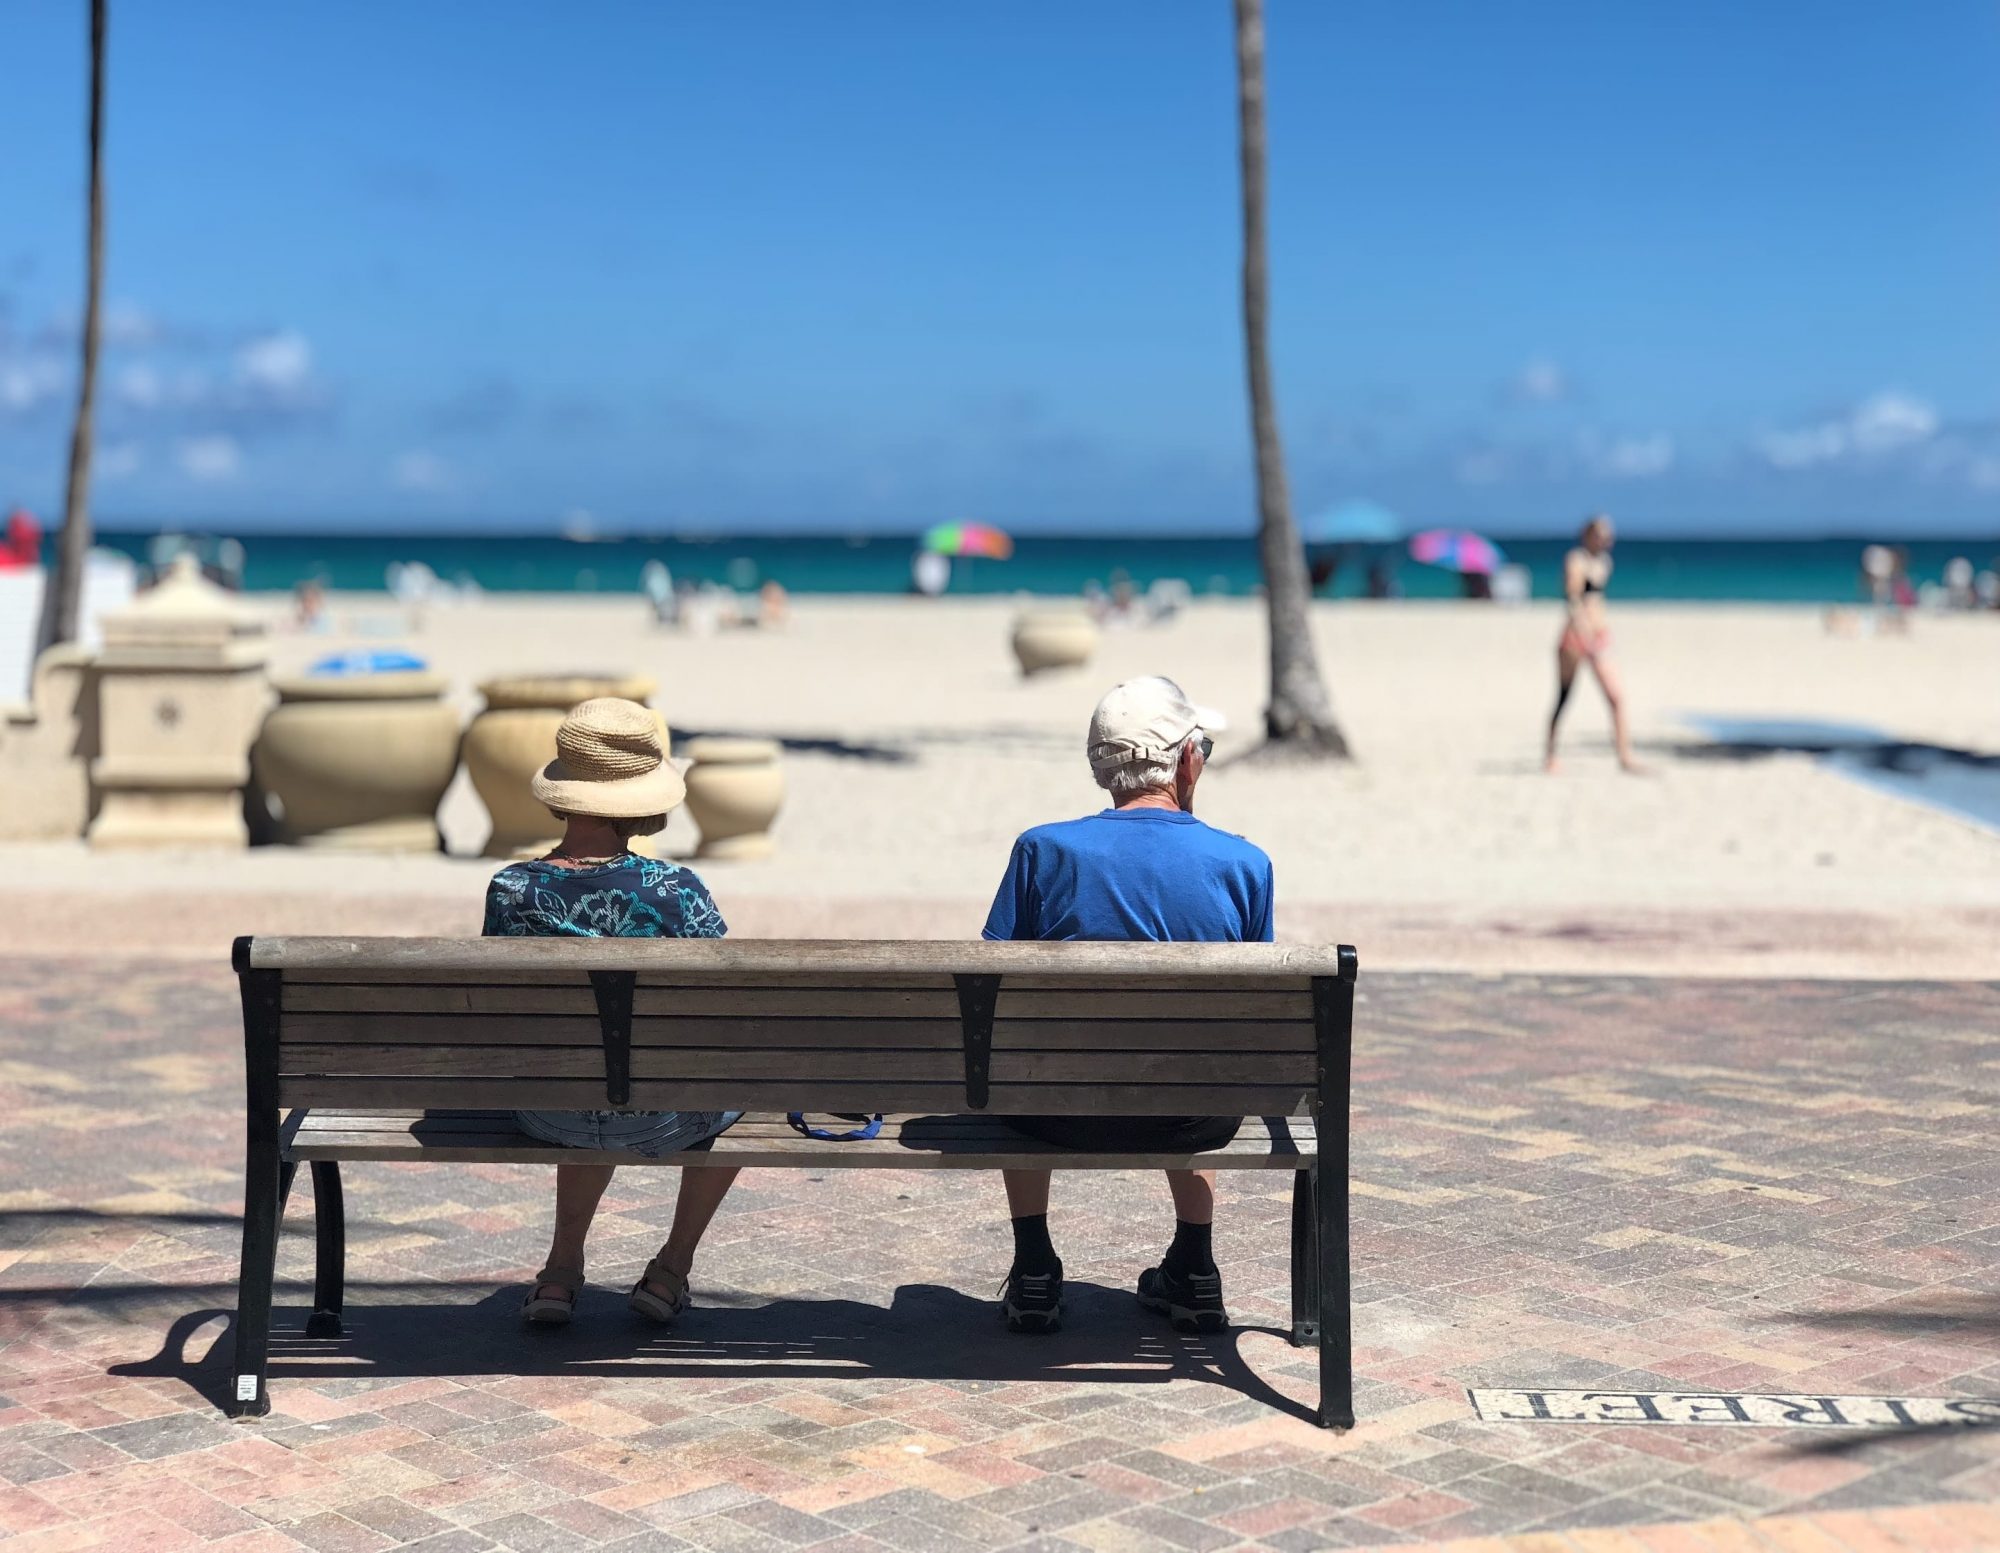 Older man and woman sitting on a bench by the beach